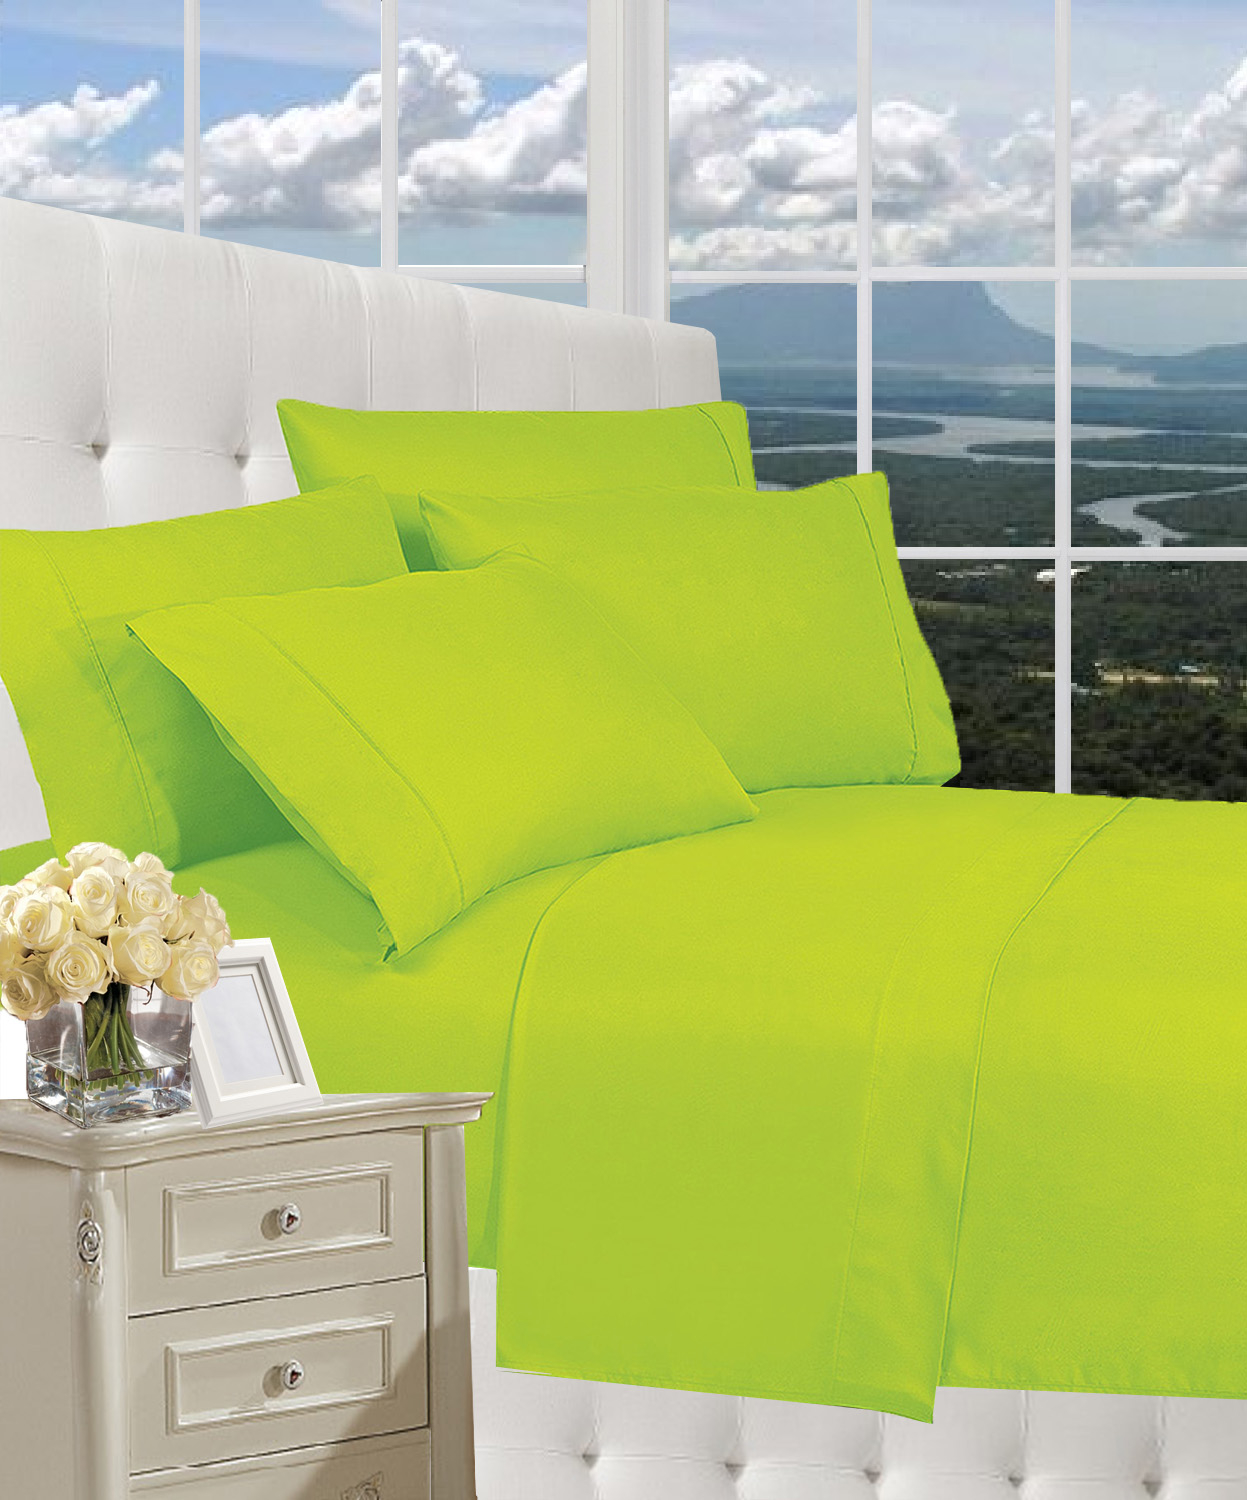 Elegant Comfort 1800 Series Wrinkle Resistant Egyptian Quality Hypoallergenic Ultra Soft Luxury 4-piece Bed Sheet Set, Full, Lime